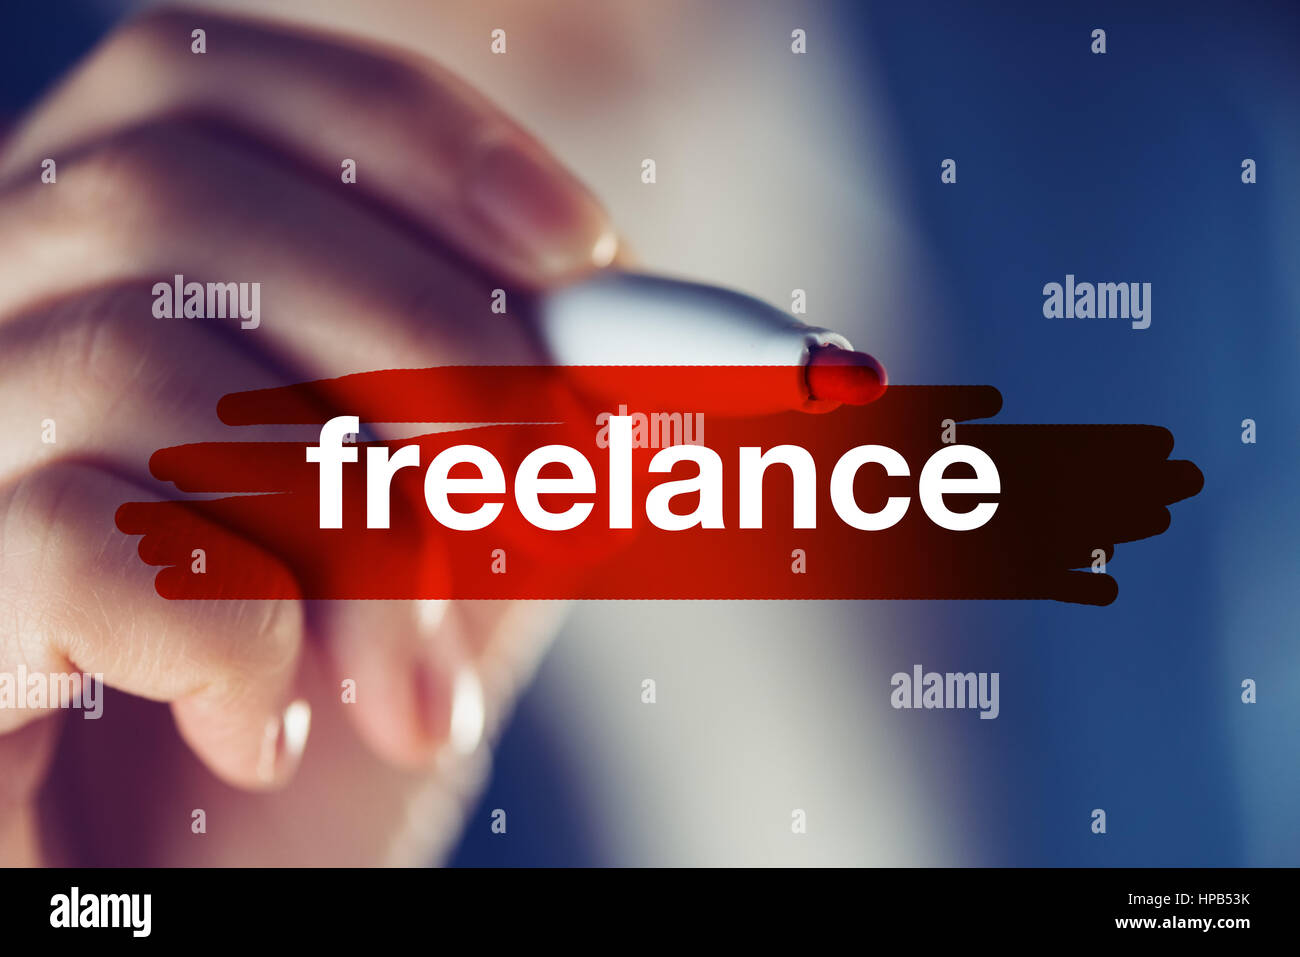 Freelance business concept, businesswoman highlighting term with red marker pen Stock Photo